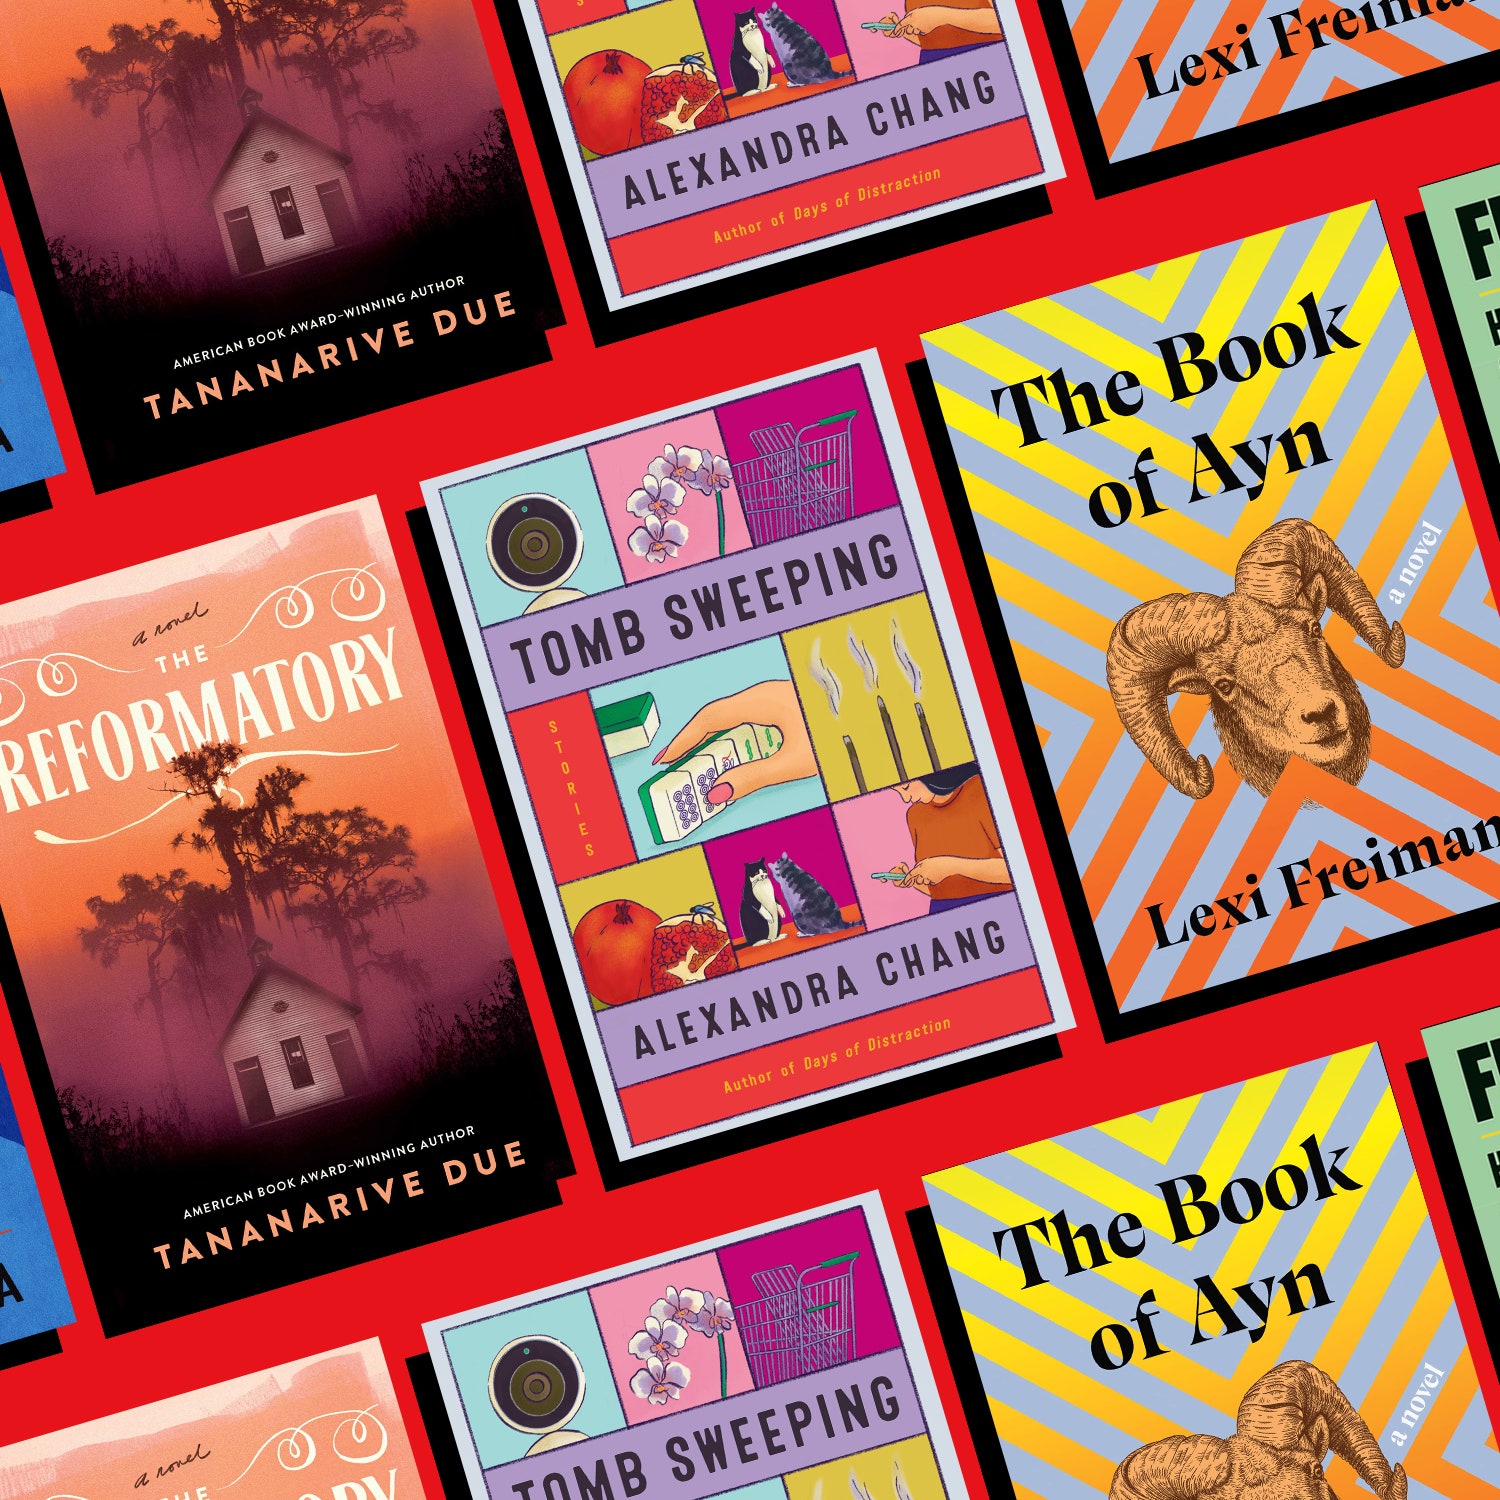 9 Books We Can’t Stop Thinking About